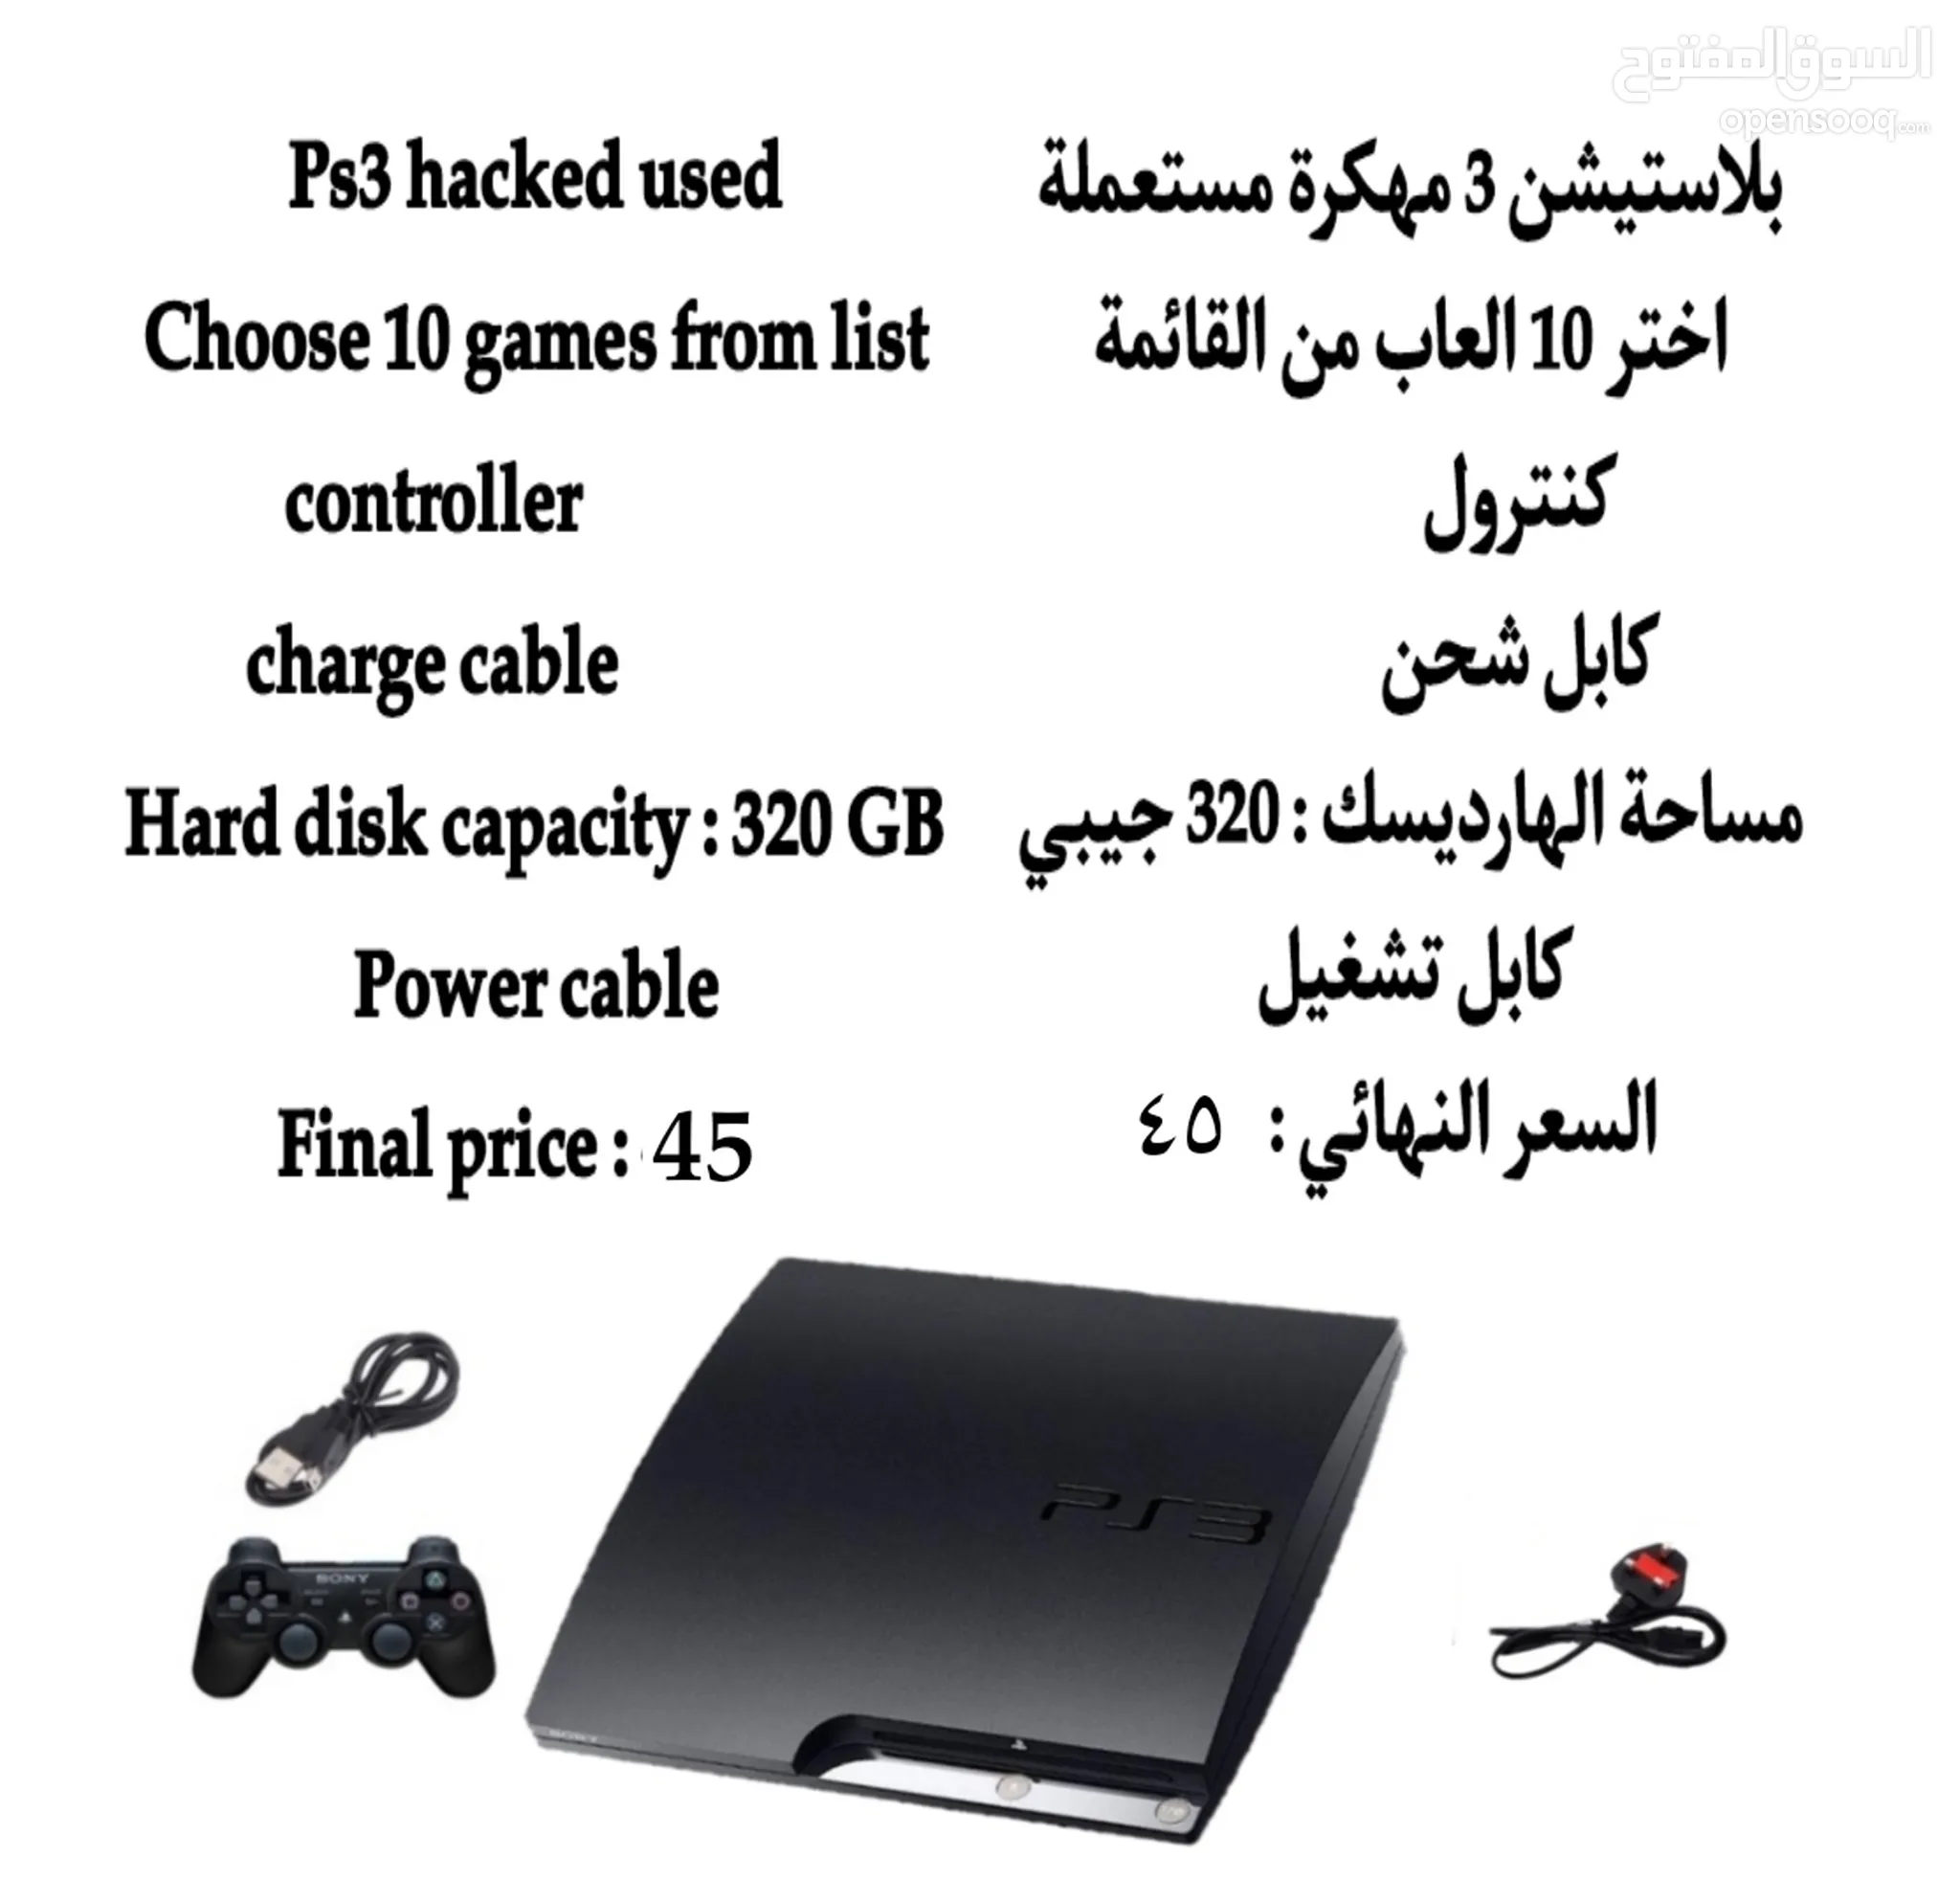 Playstation 3 For Sale in Oman : Used : Best Prices | OpenSooq